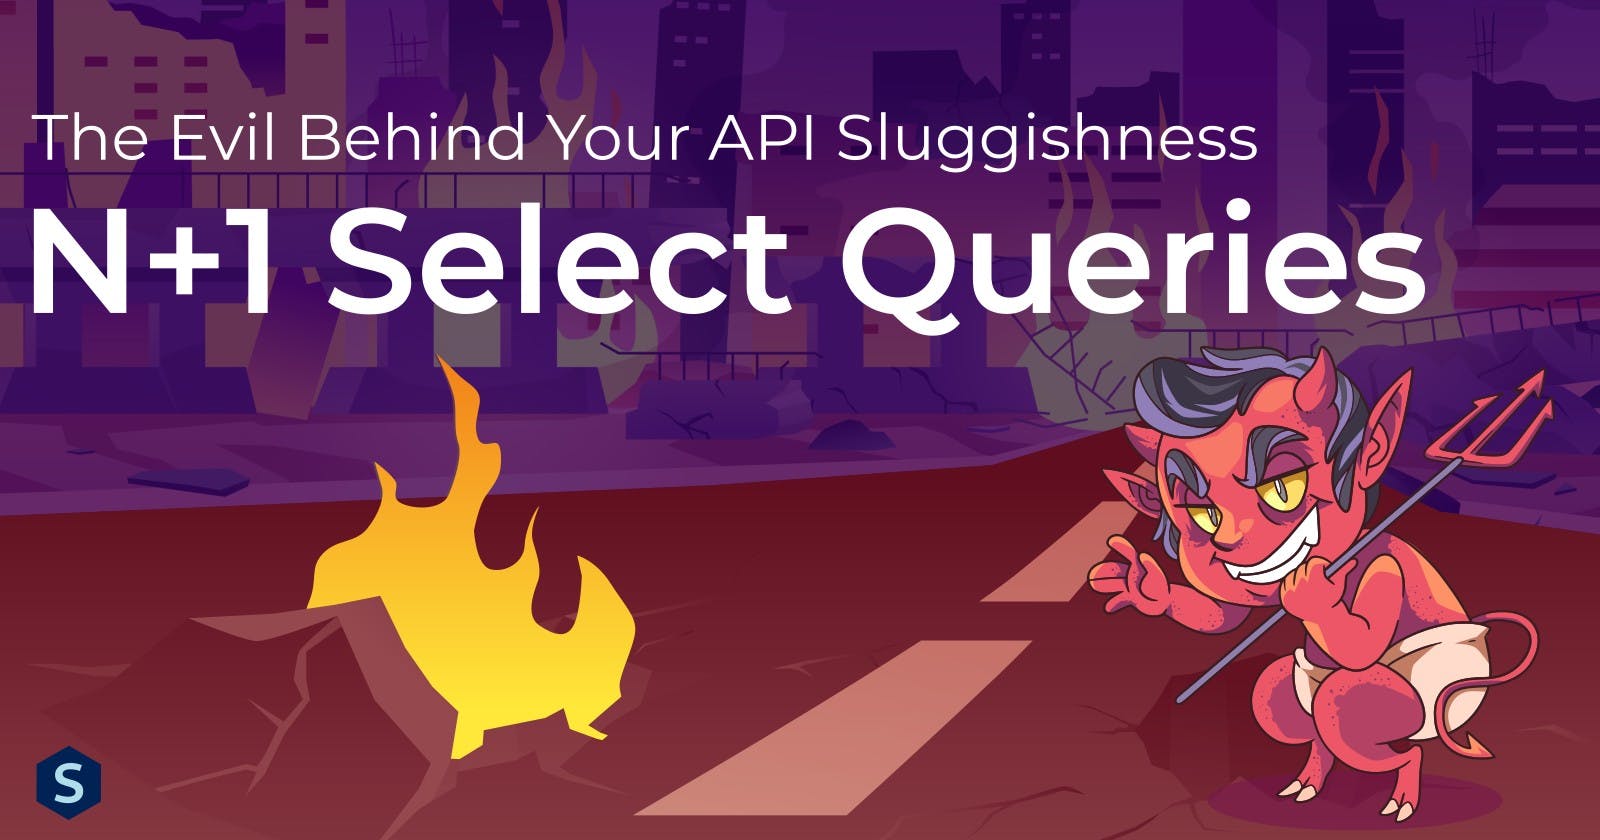 The Evil Behind Your API Sluggishness: N+1 Select Queries